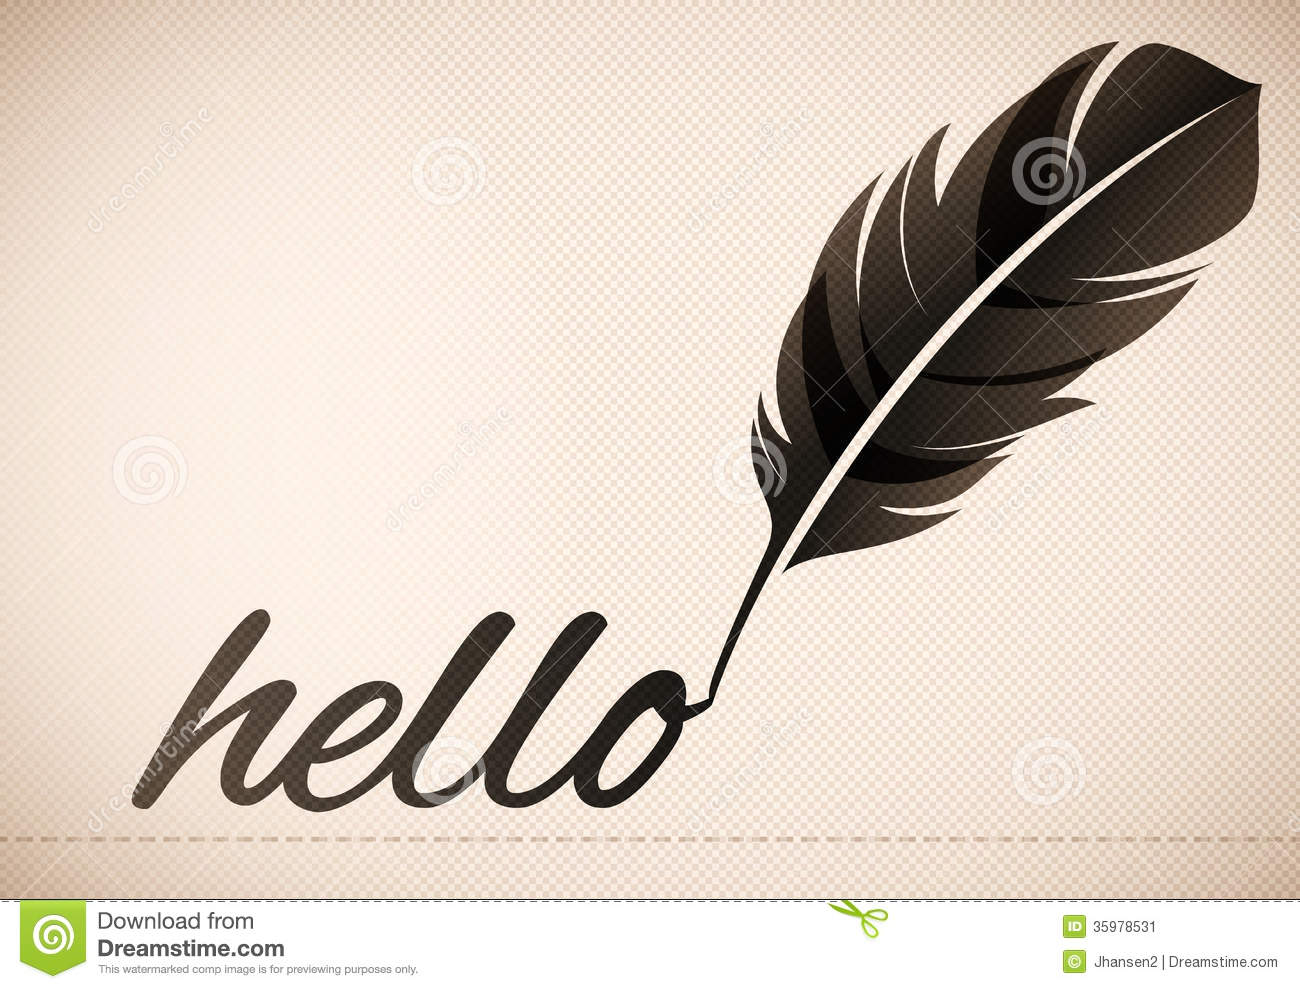 Quill Writing Pen Stock Image   Image  35978531